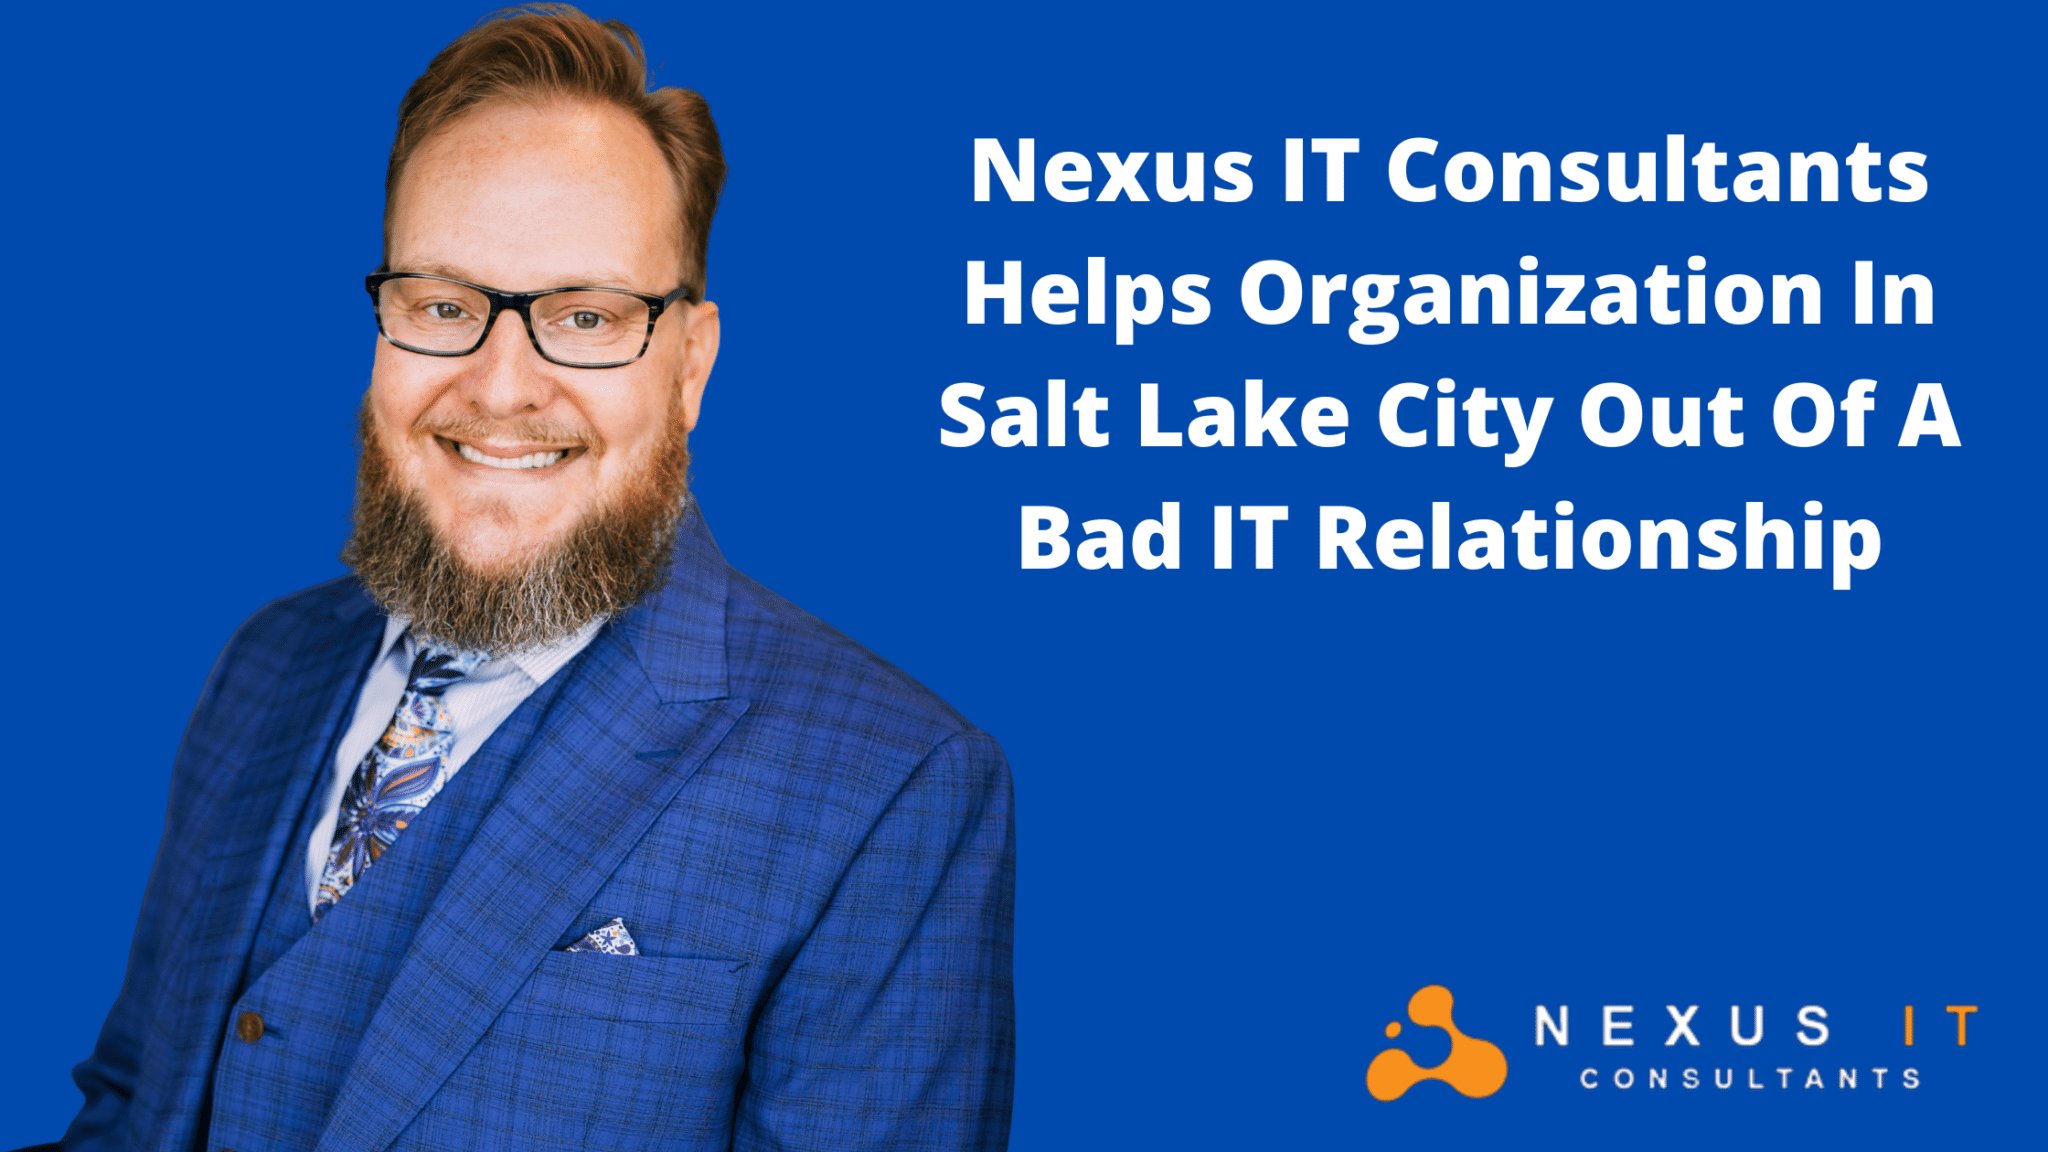 Nexus IT Consultants Helps Organization In Salt Lake City Out Of A Bad IT Relationship